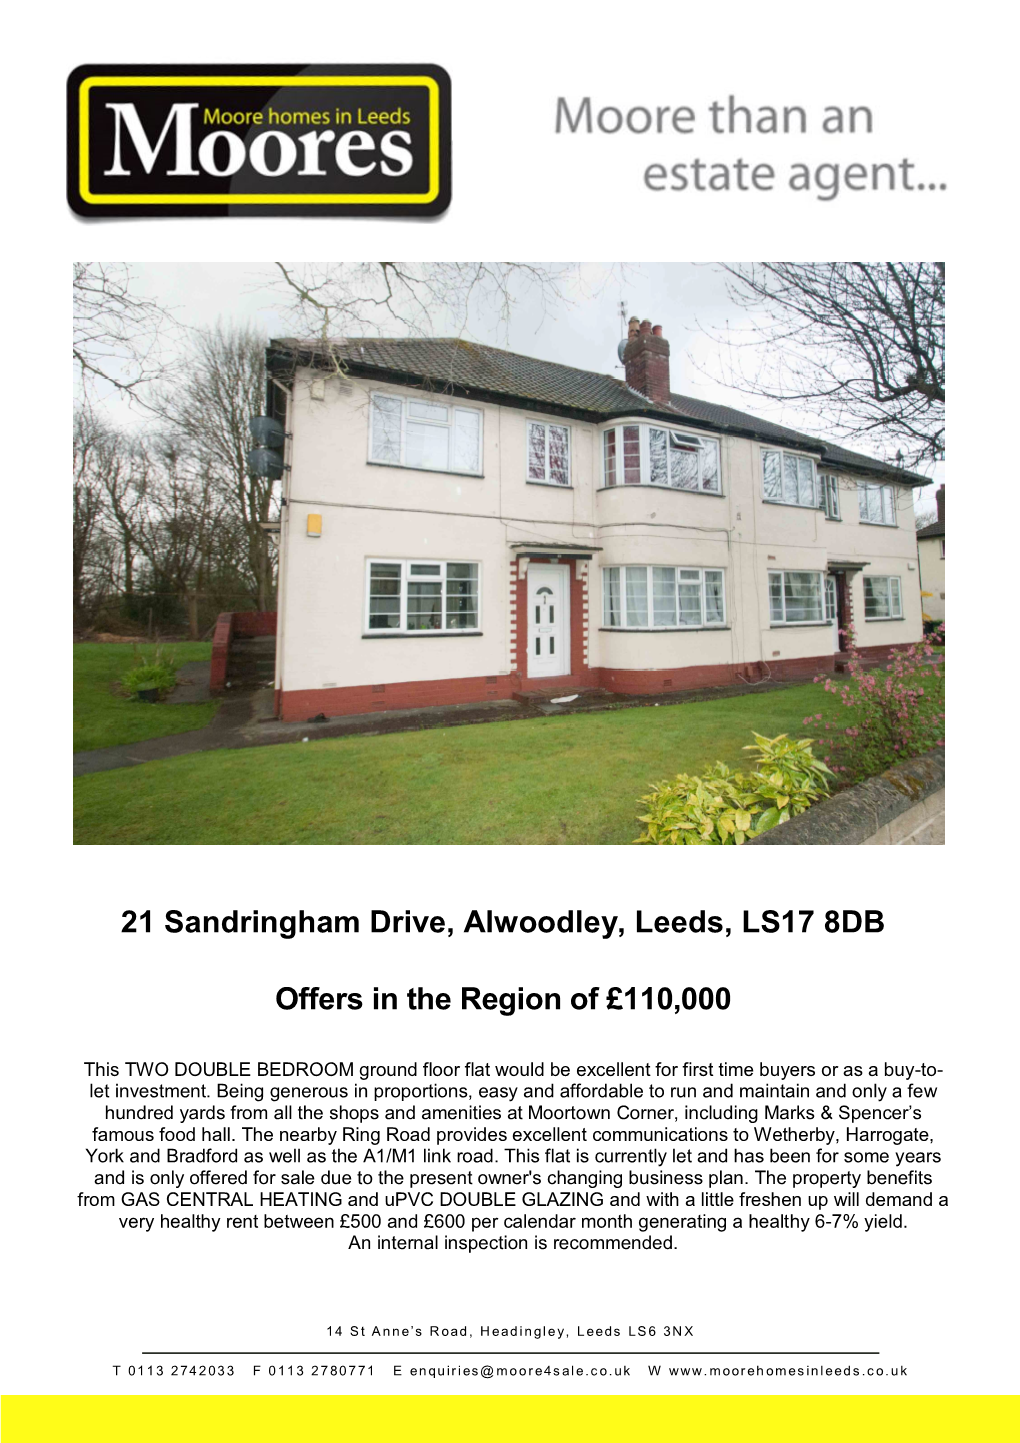 21 Sandringham Drive, Alwoodley, Leeds, LS17 8DB Offers in The